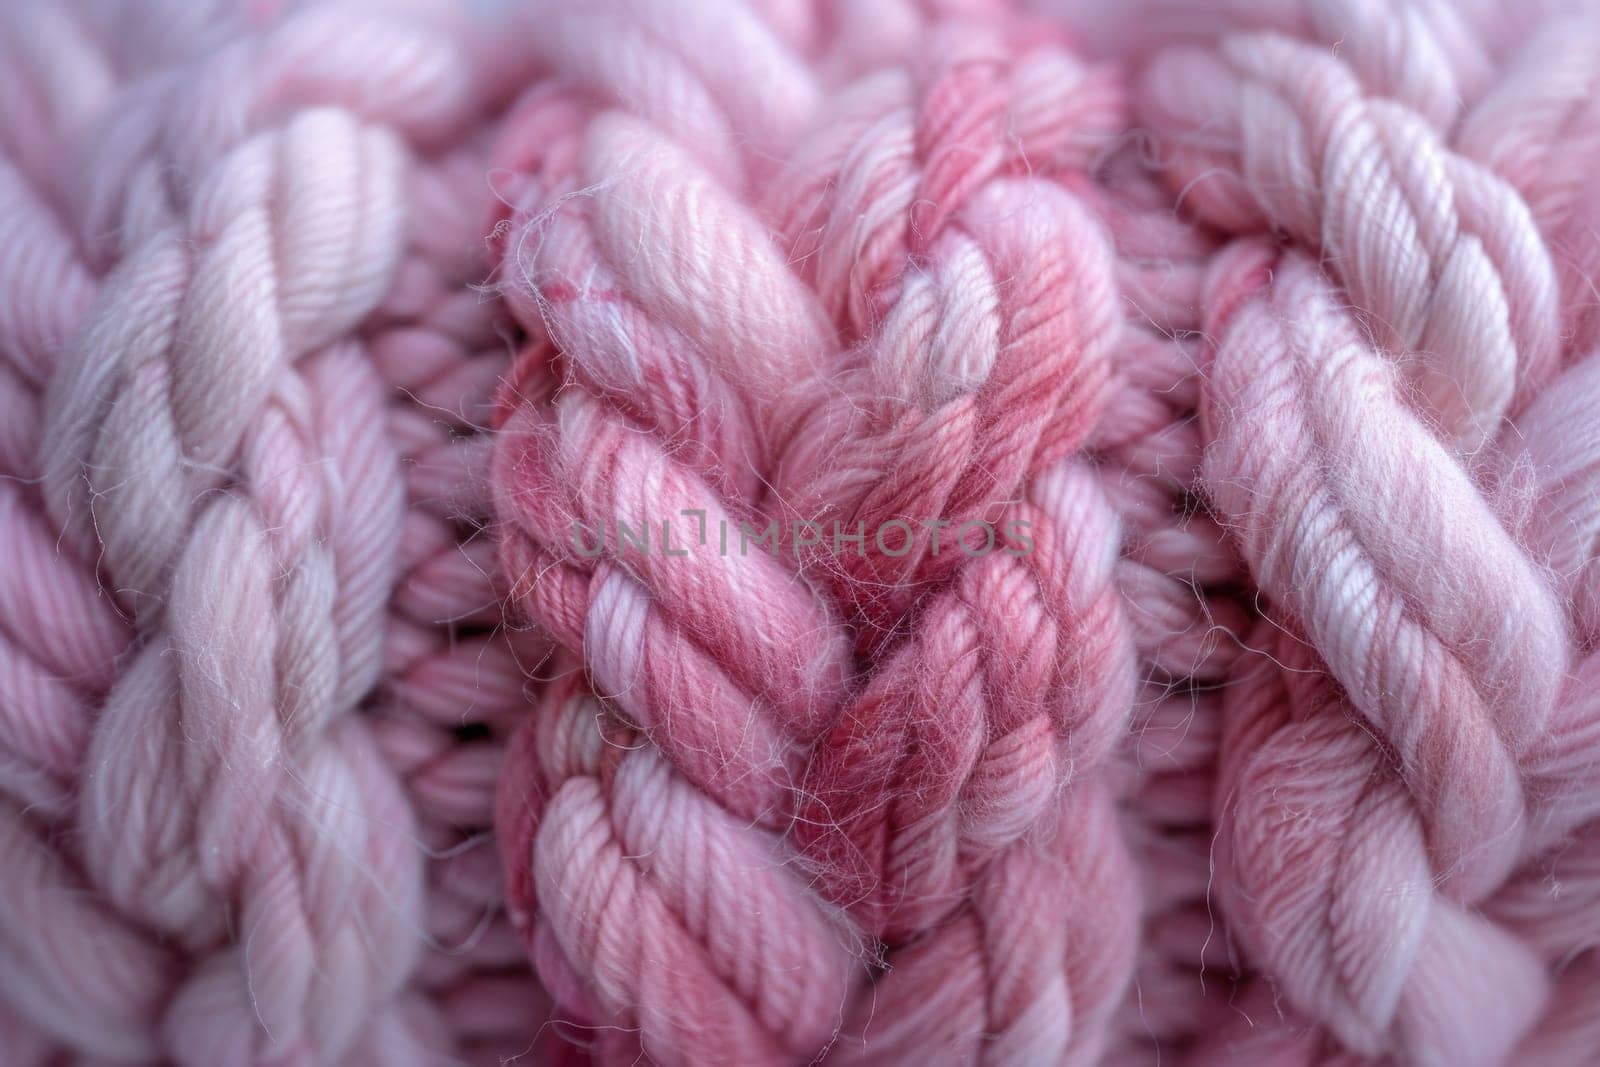 A detailed view of intricately woven pink and white yarn, showcasing the delicate intertwining fibers and color contrast.